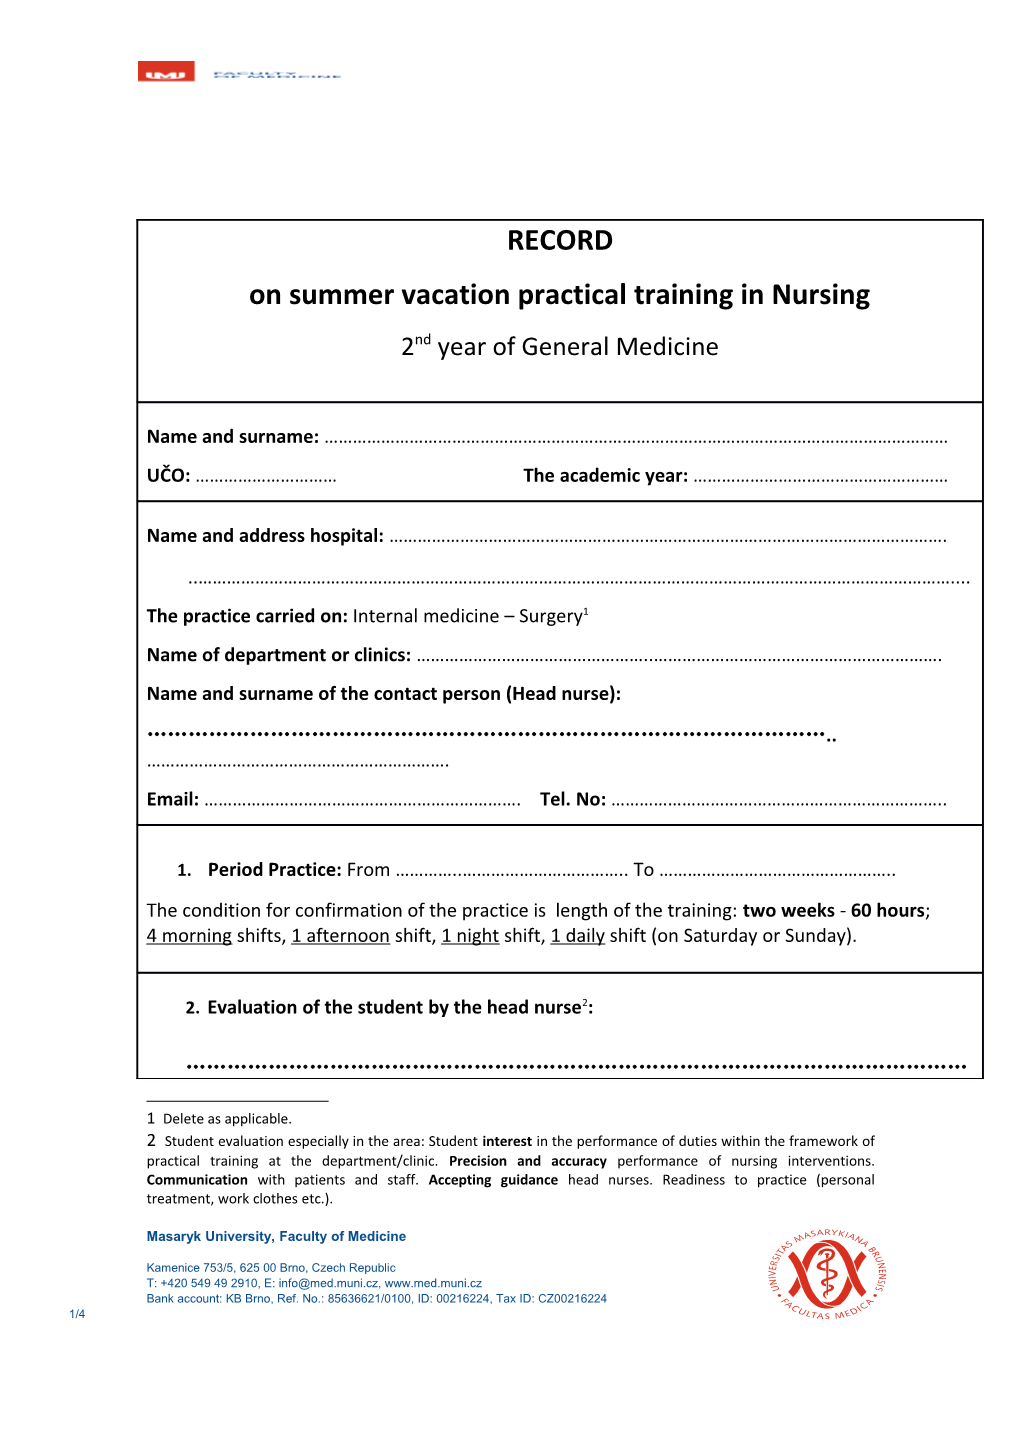 For Organisation of the Summer Vacation Practical Training in Nursing